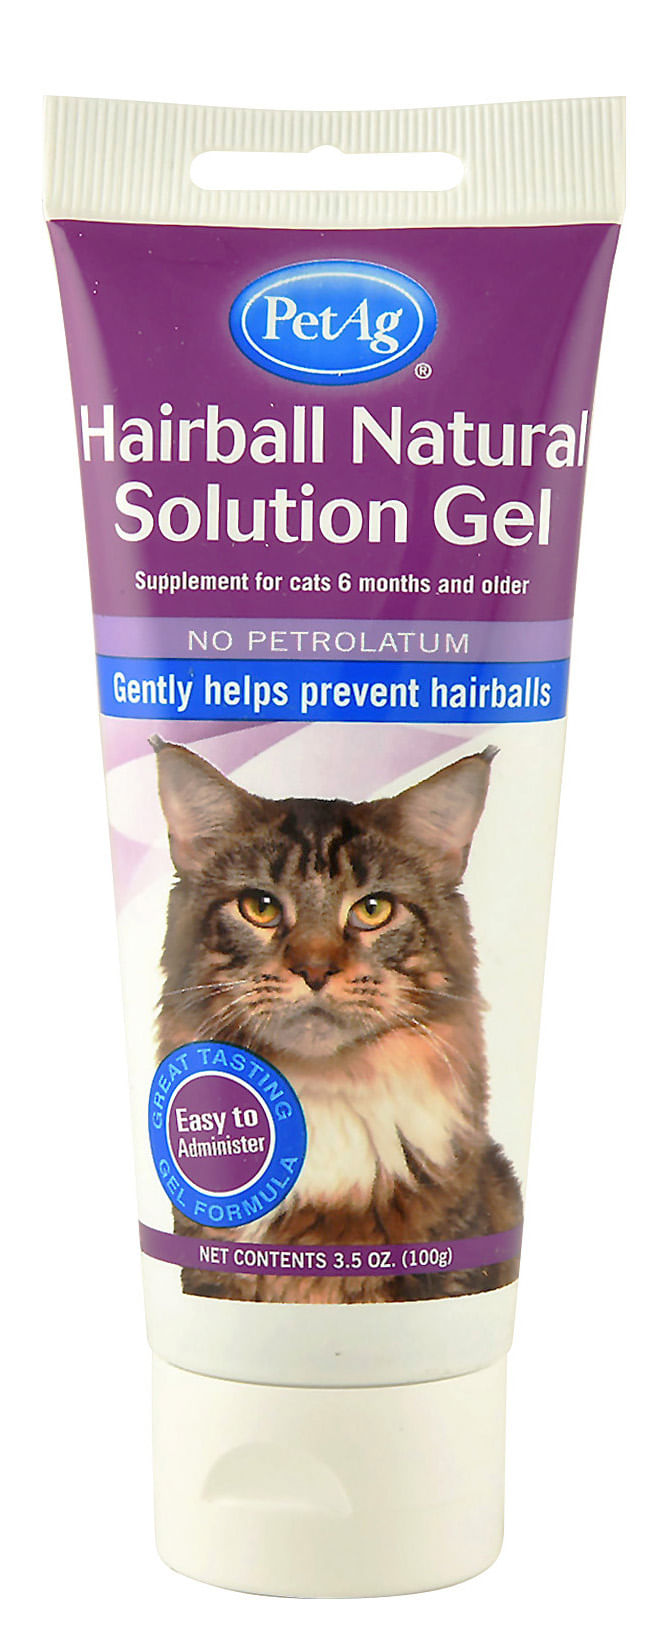 Hairball-Natural-Solution-Gel-for-Cats